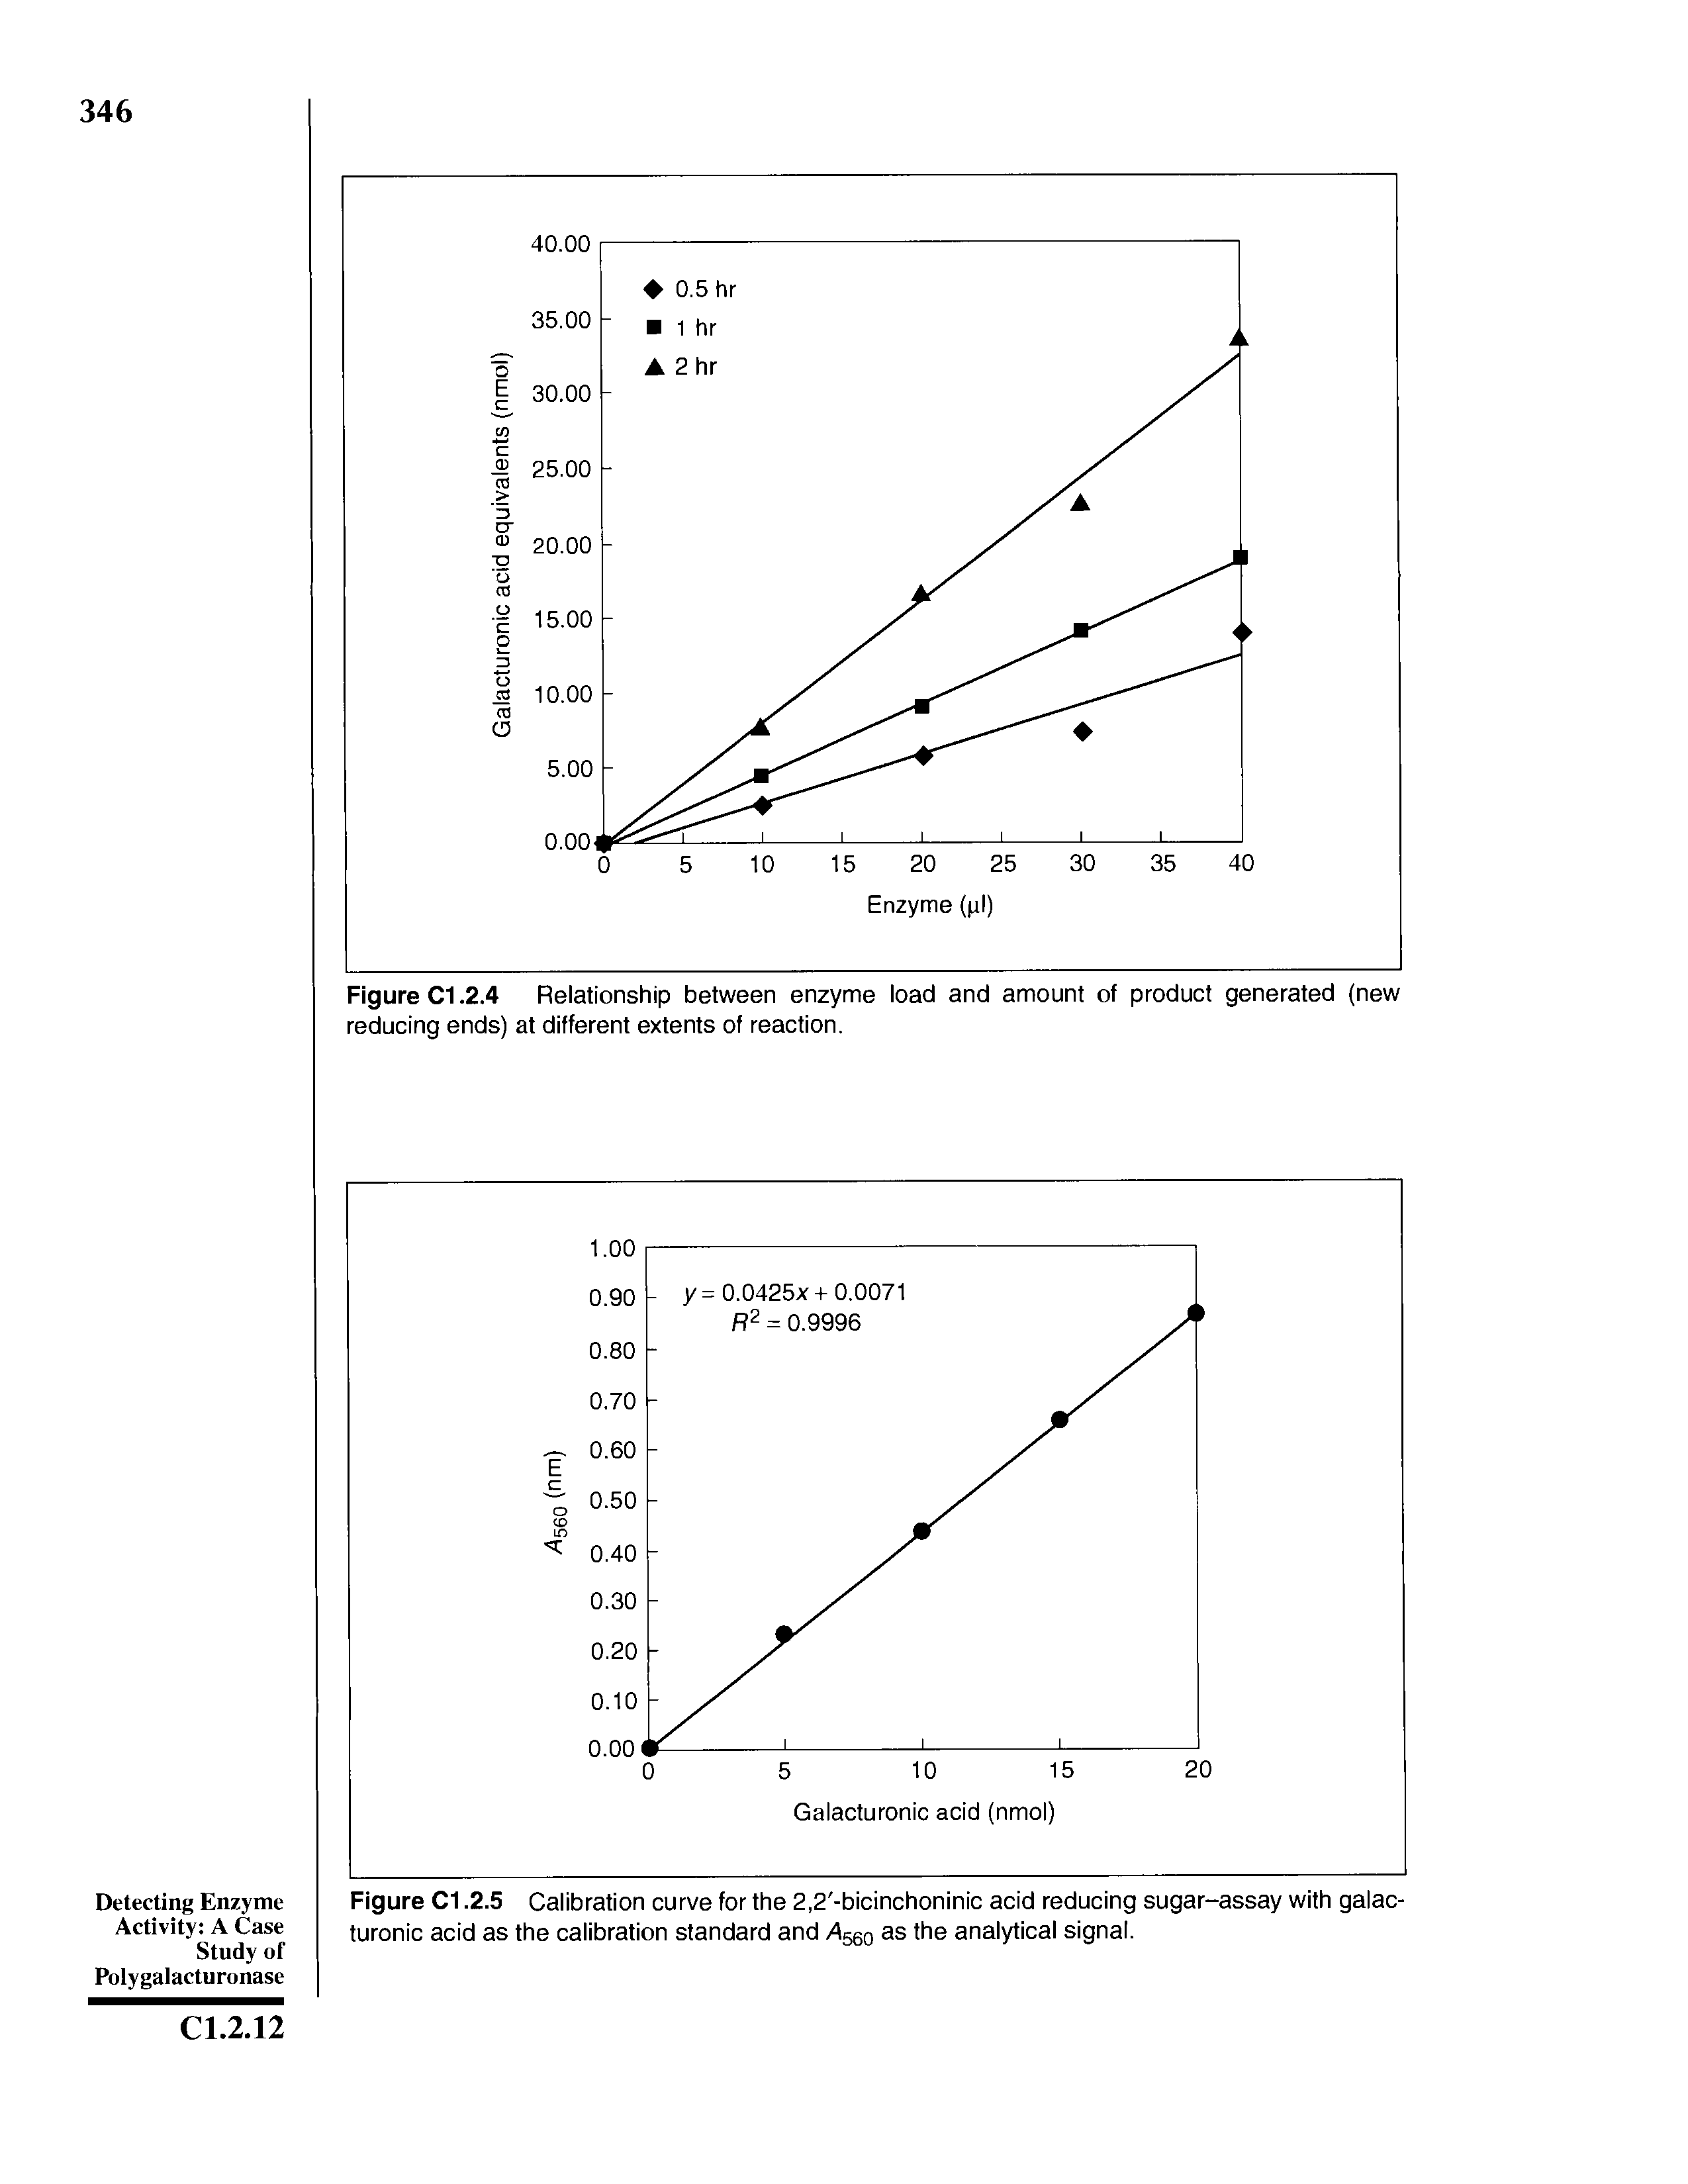 Figure C1.2.5 Calibration curve for the 2,2 -bicinchoninic acid reducing sugar-assay with galac-turonic acid as the calibration standard and A560 as the analytical signal.